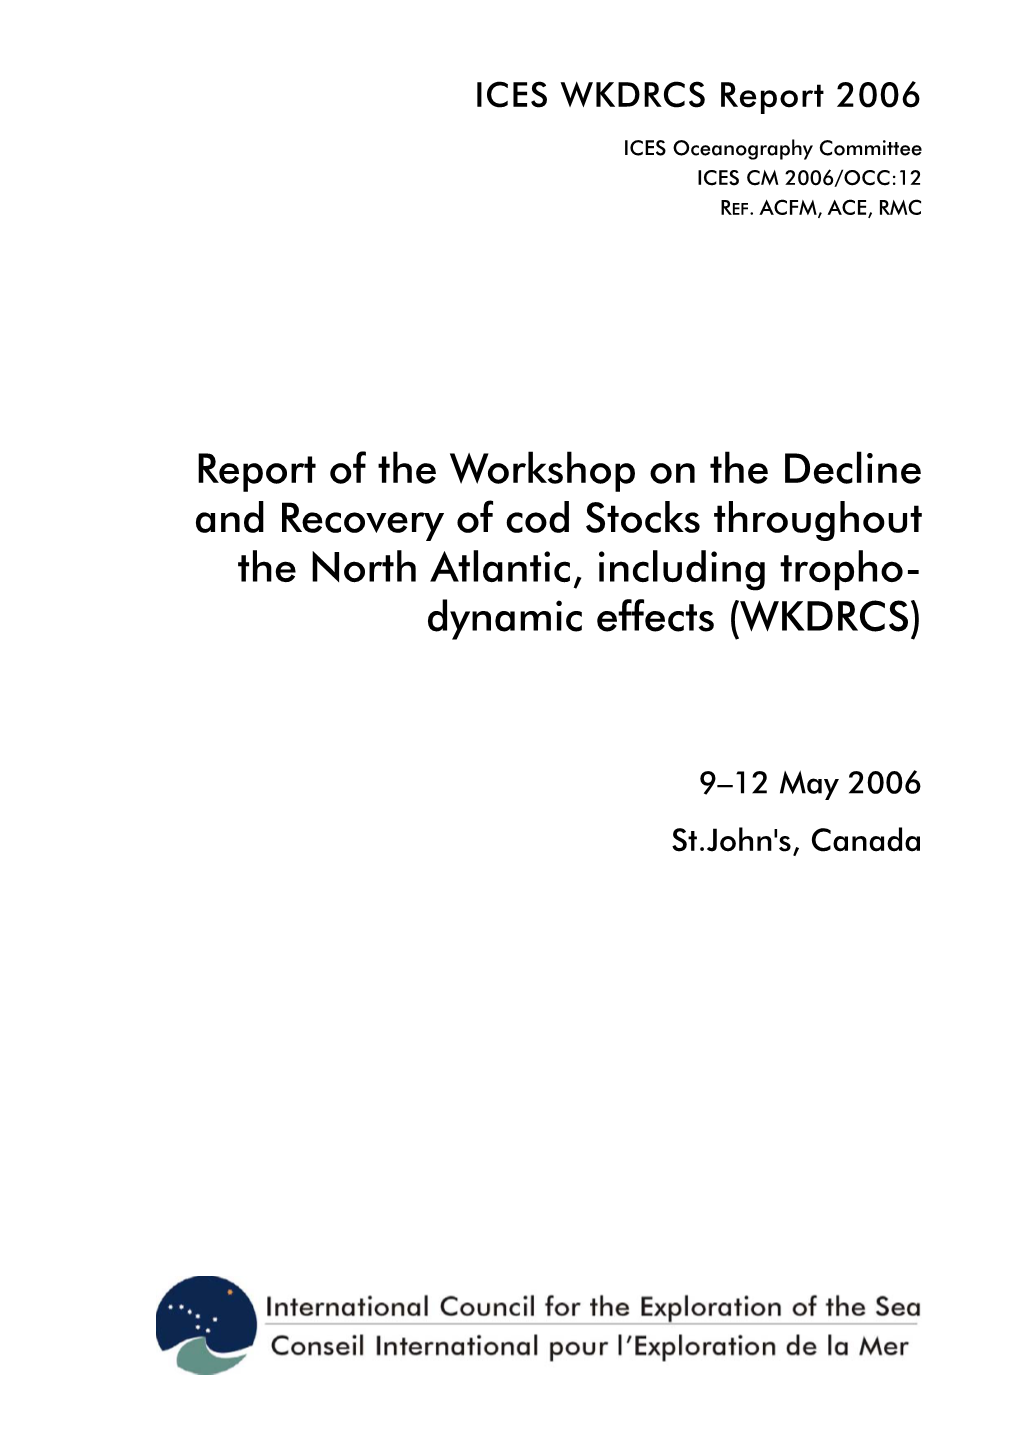 Report of the Workshop on the Decline and Recovery of Cod Stocks Throughout the North Atlantic, Including Tropho- Dynamic Effects (WKDRCS)